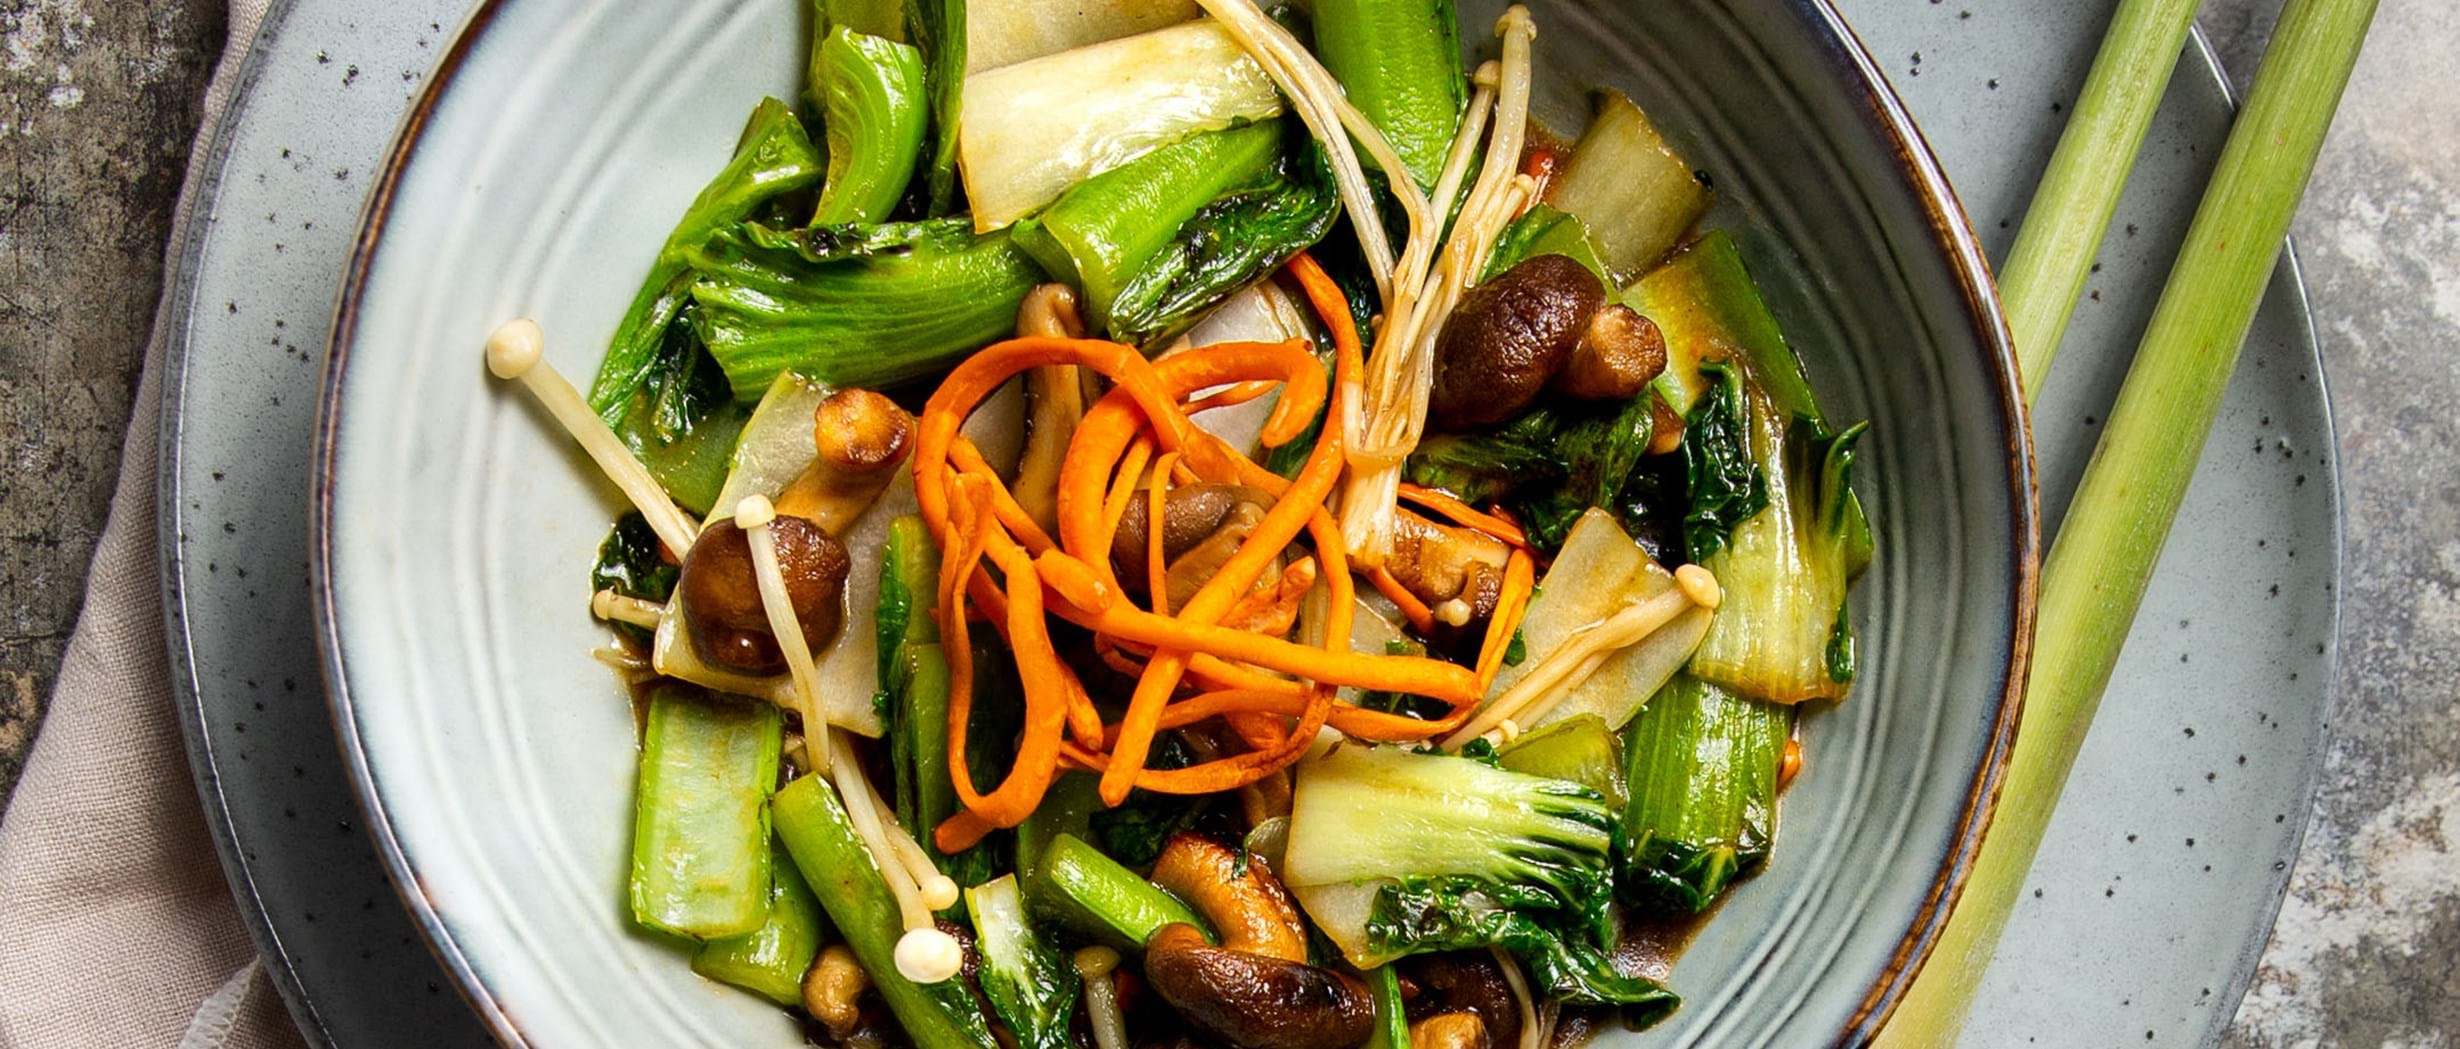 Wok dish with mushrooms and Asian vegetables